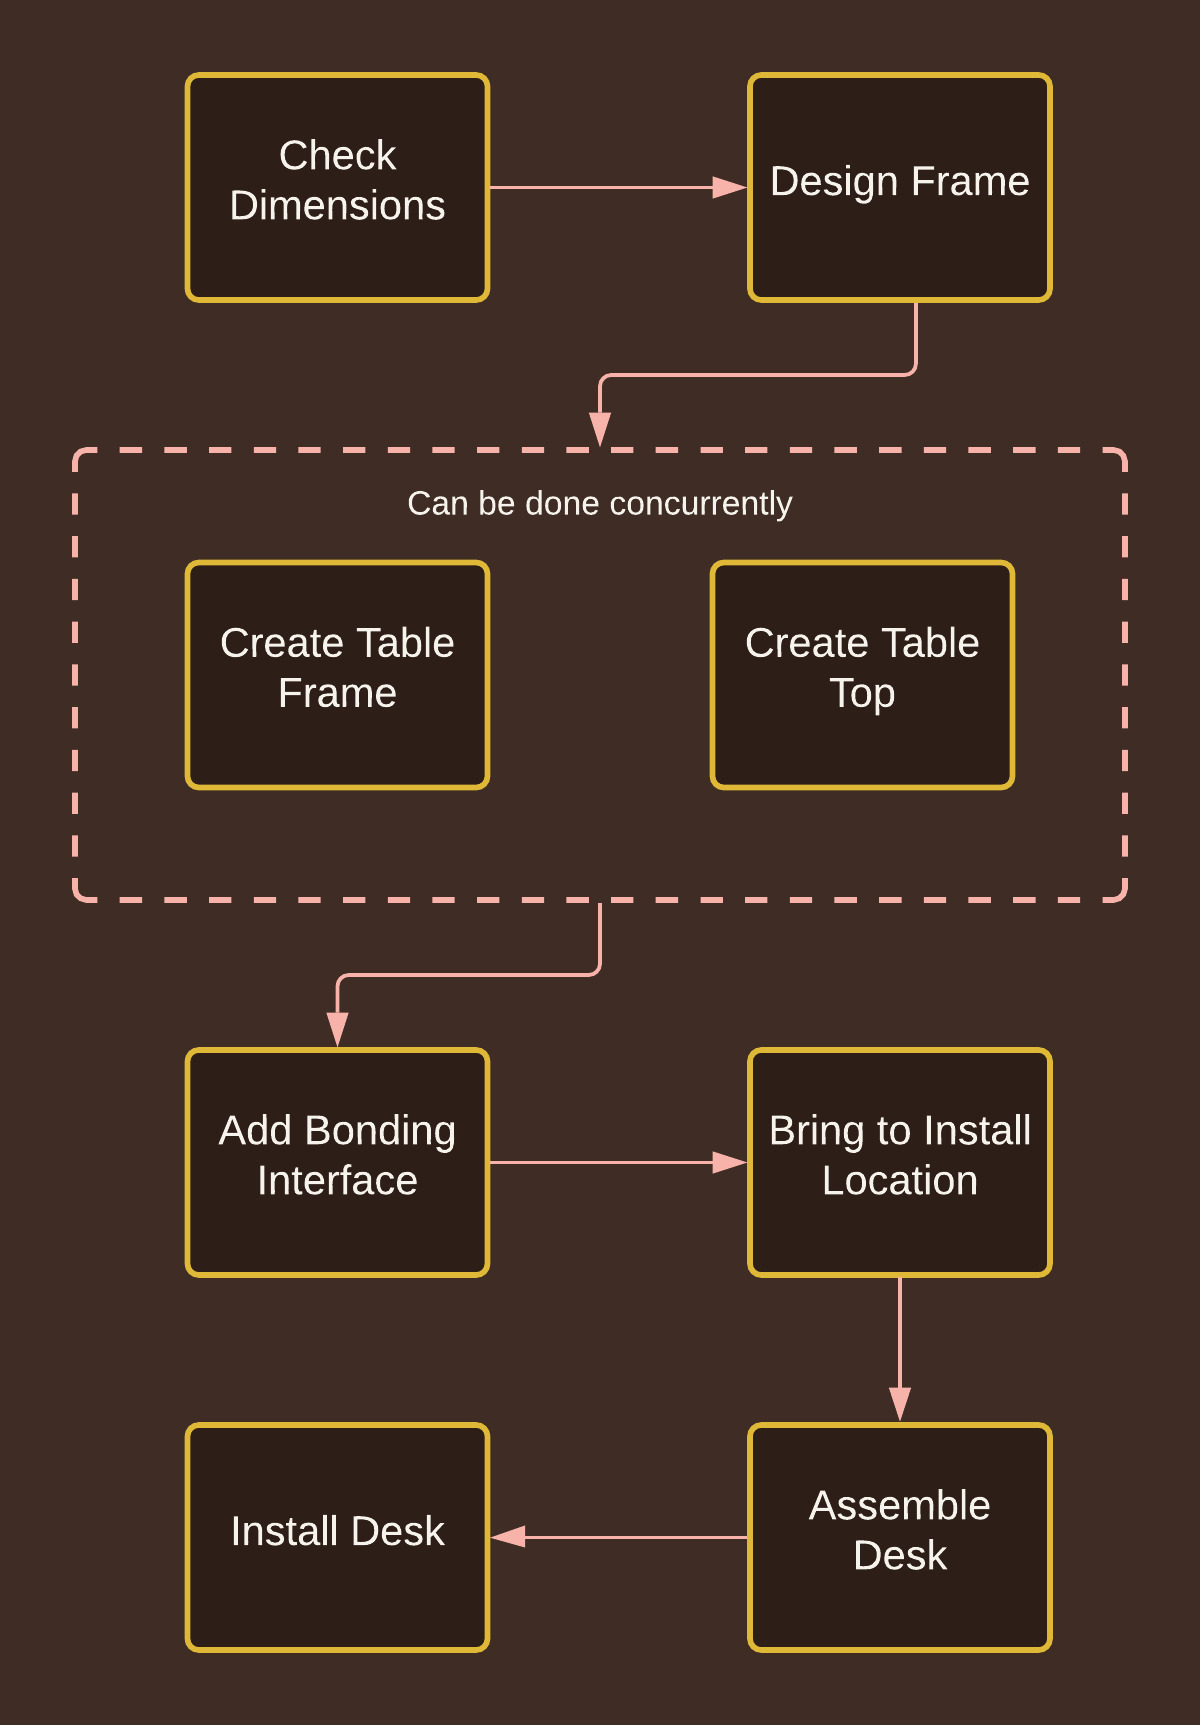 Diagram of the milestone dependencies for making a table